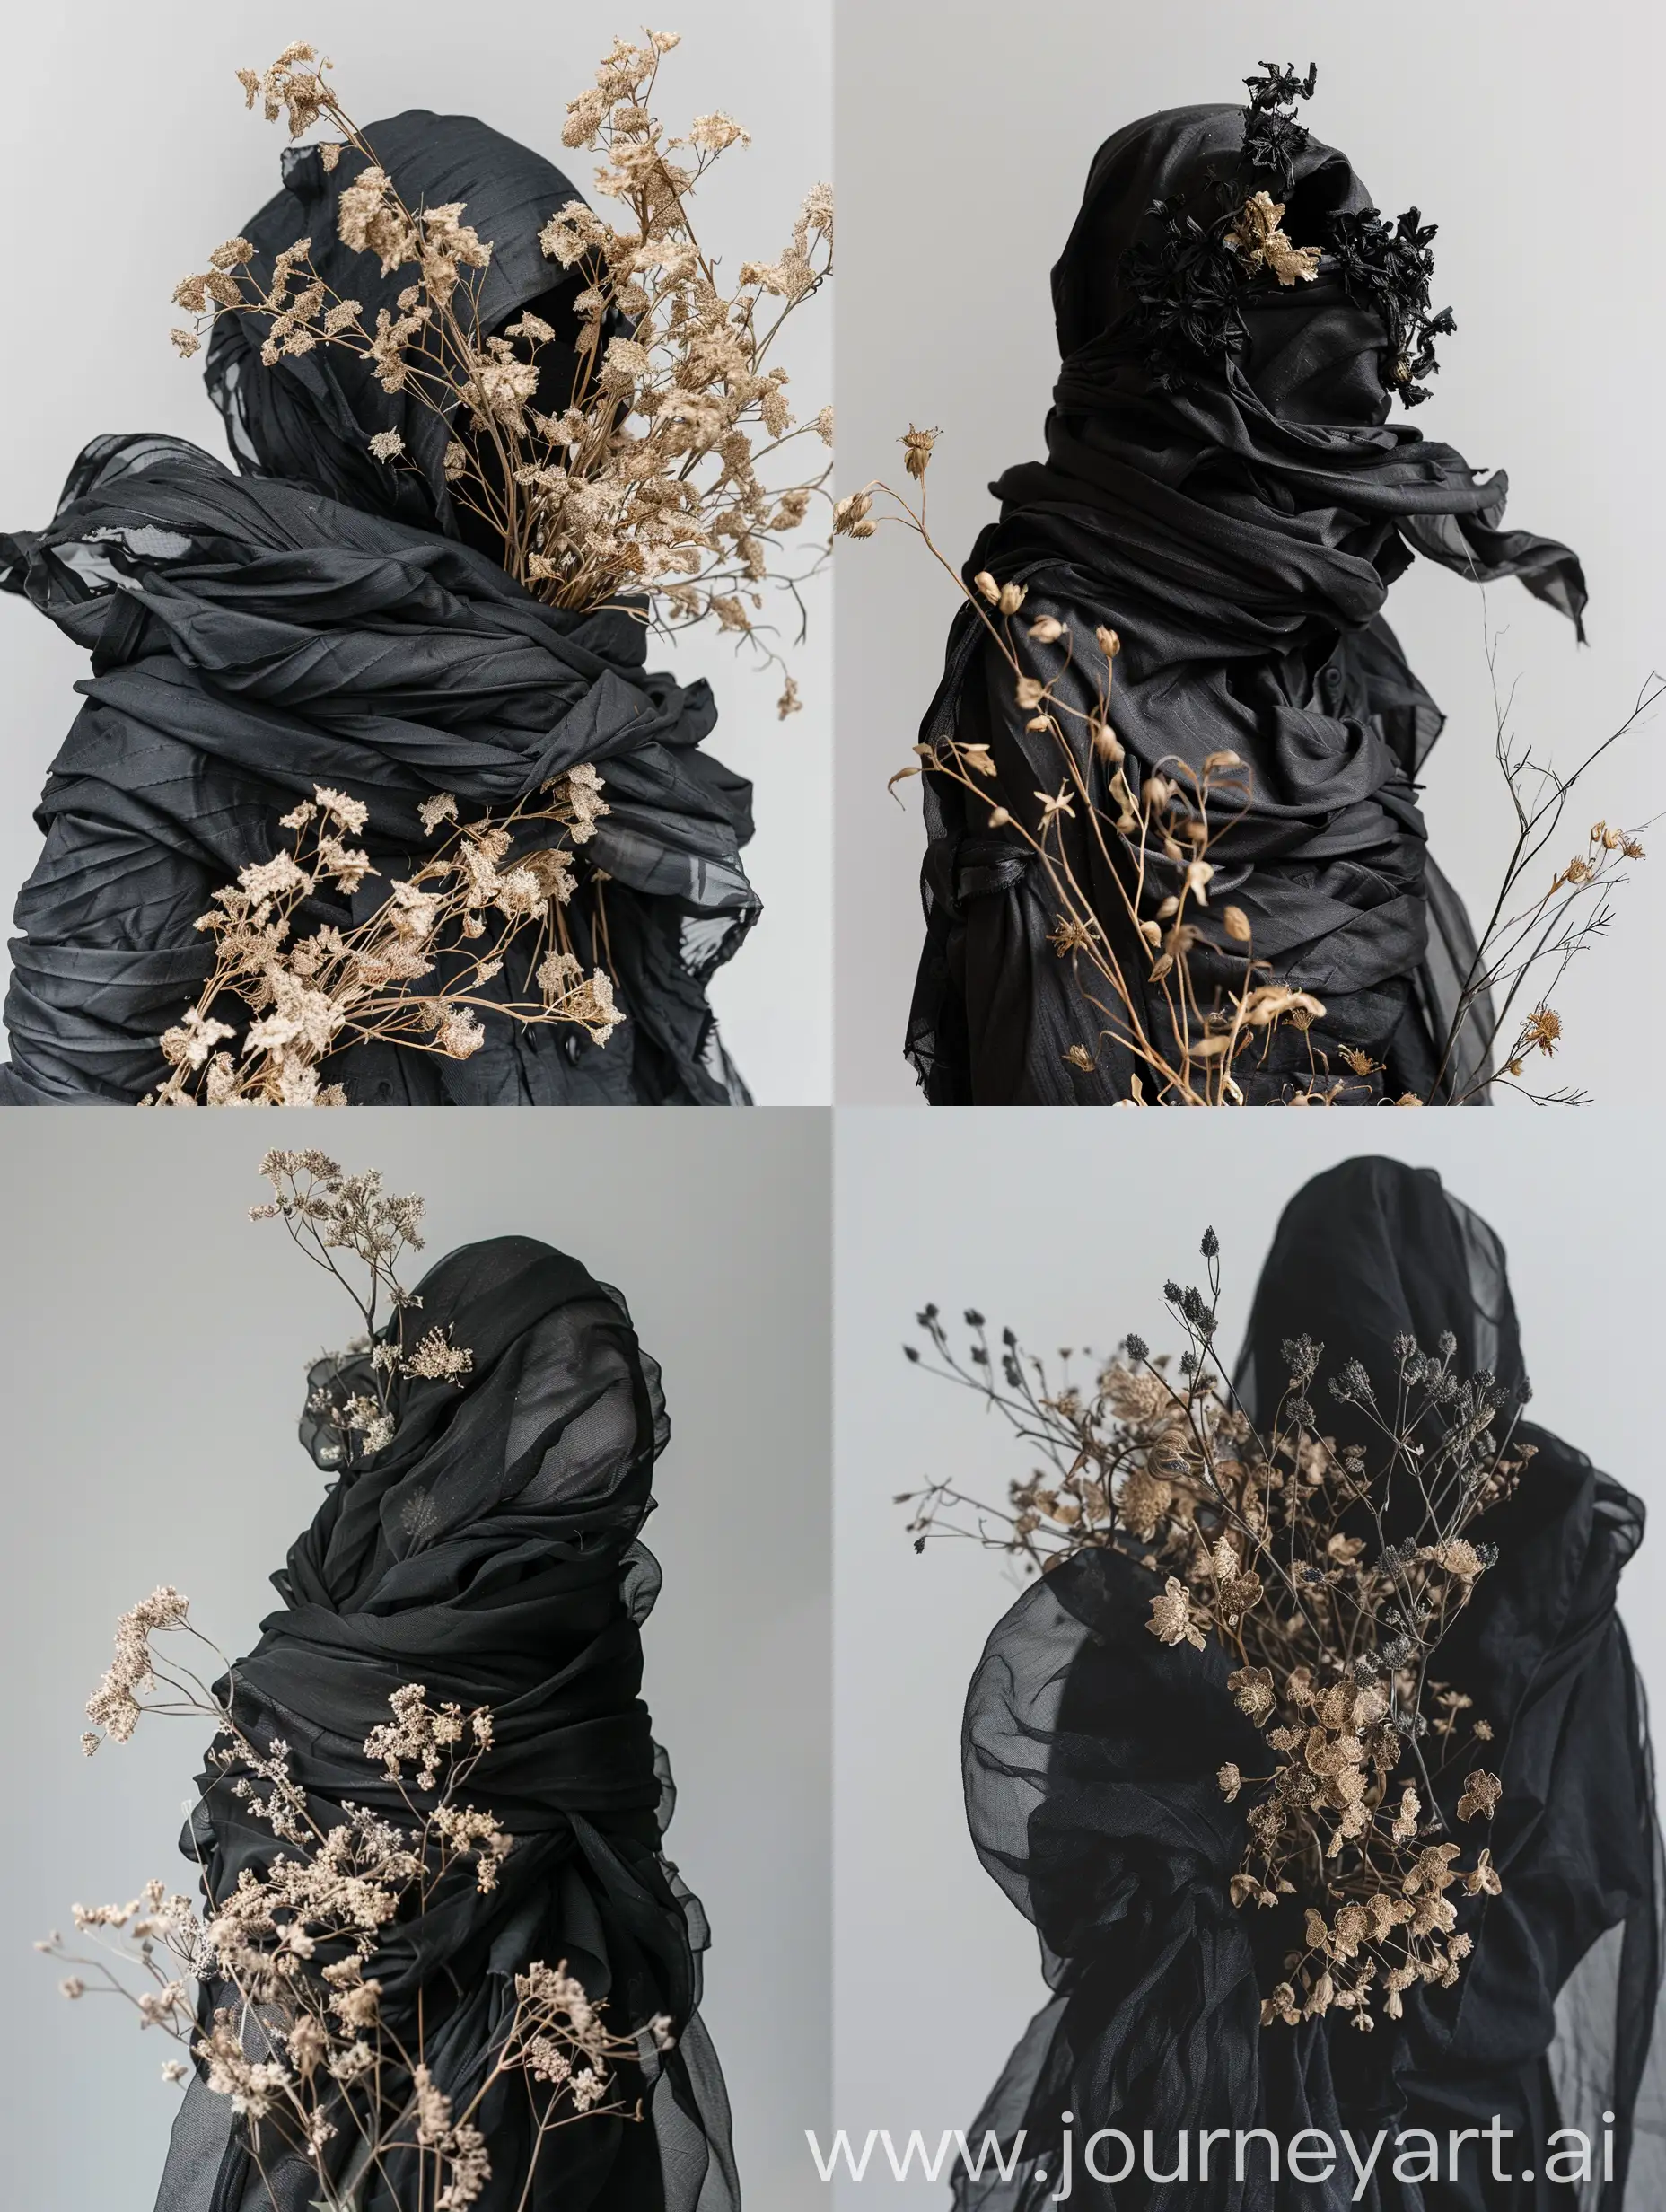 create an image of dry flowers and black abstract clothing wrapped around the flowers